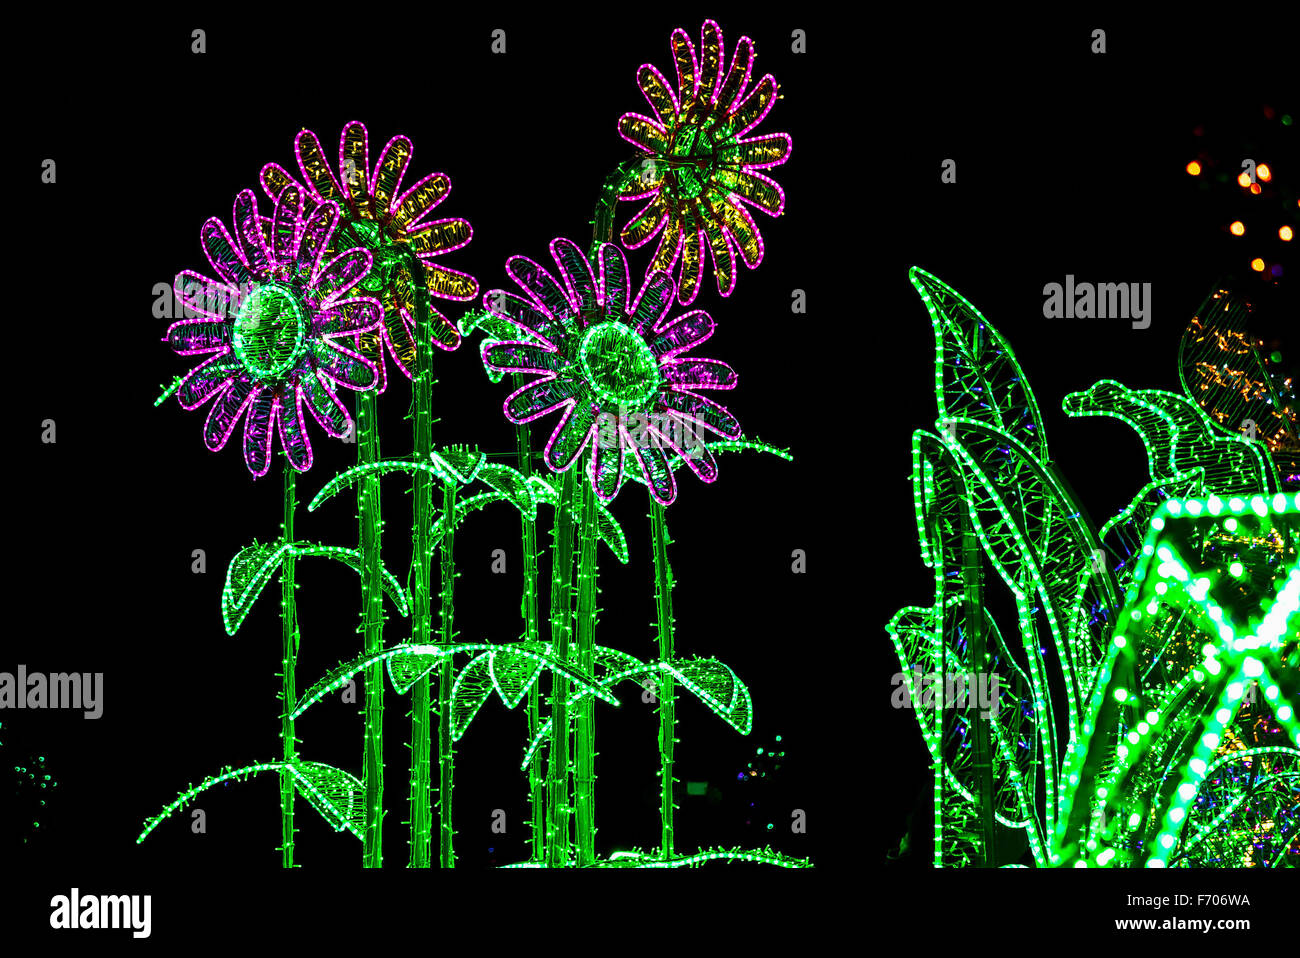 Construction of Flowers Similar to Chamomiles Illuminated from Colorful Lamps Stock Photo